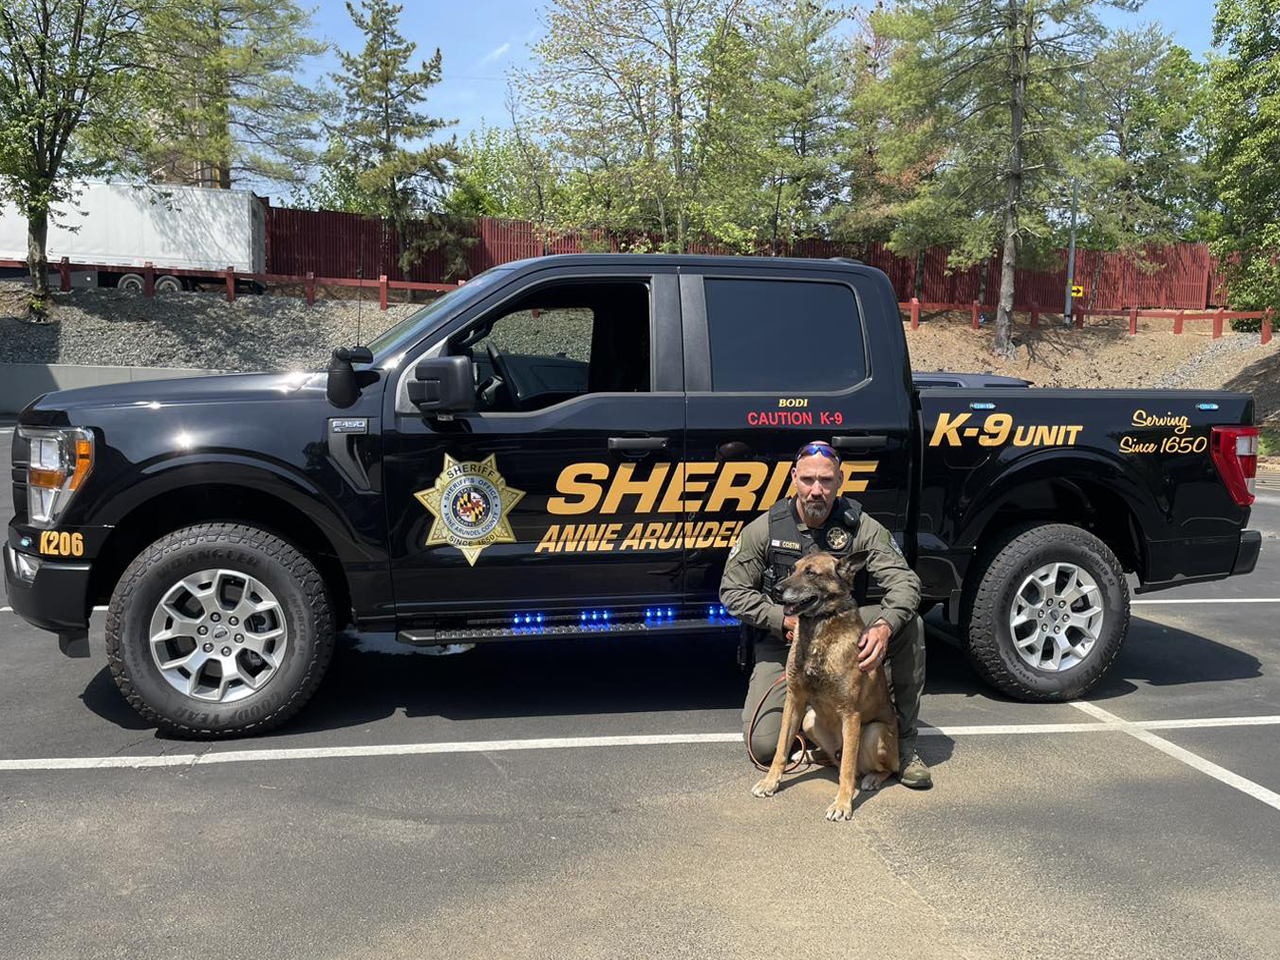 Sheriff truck with sheriff and his K-9 dog